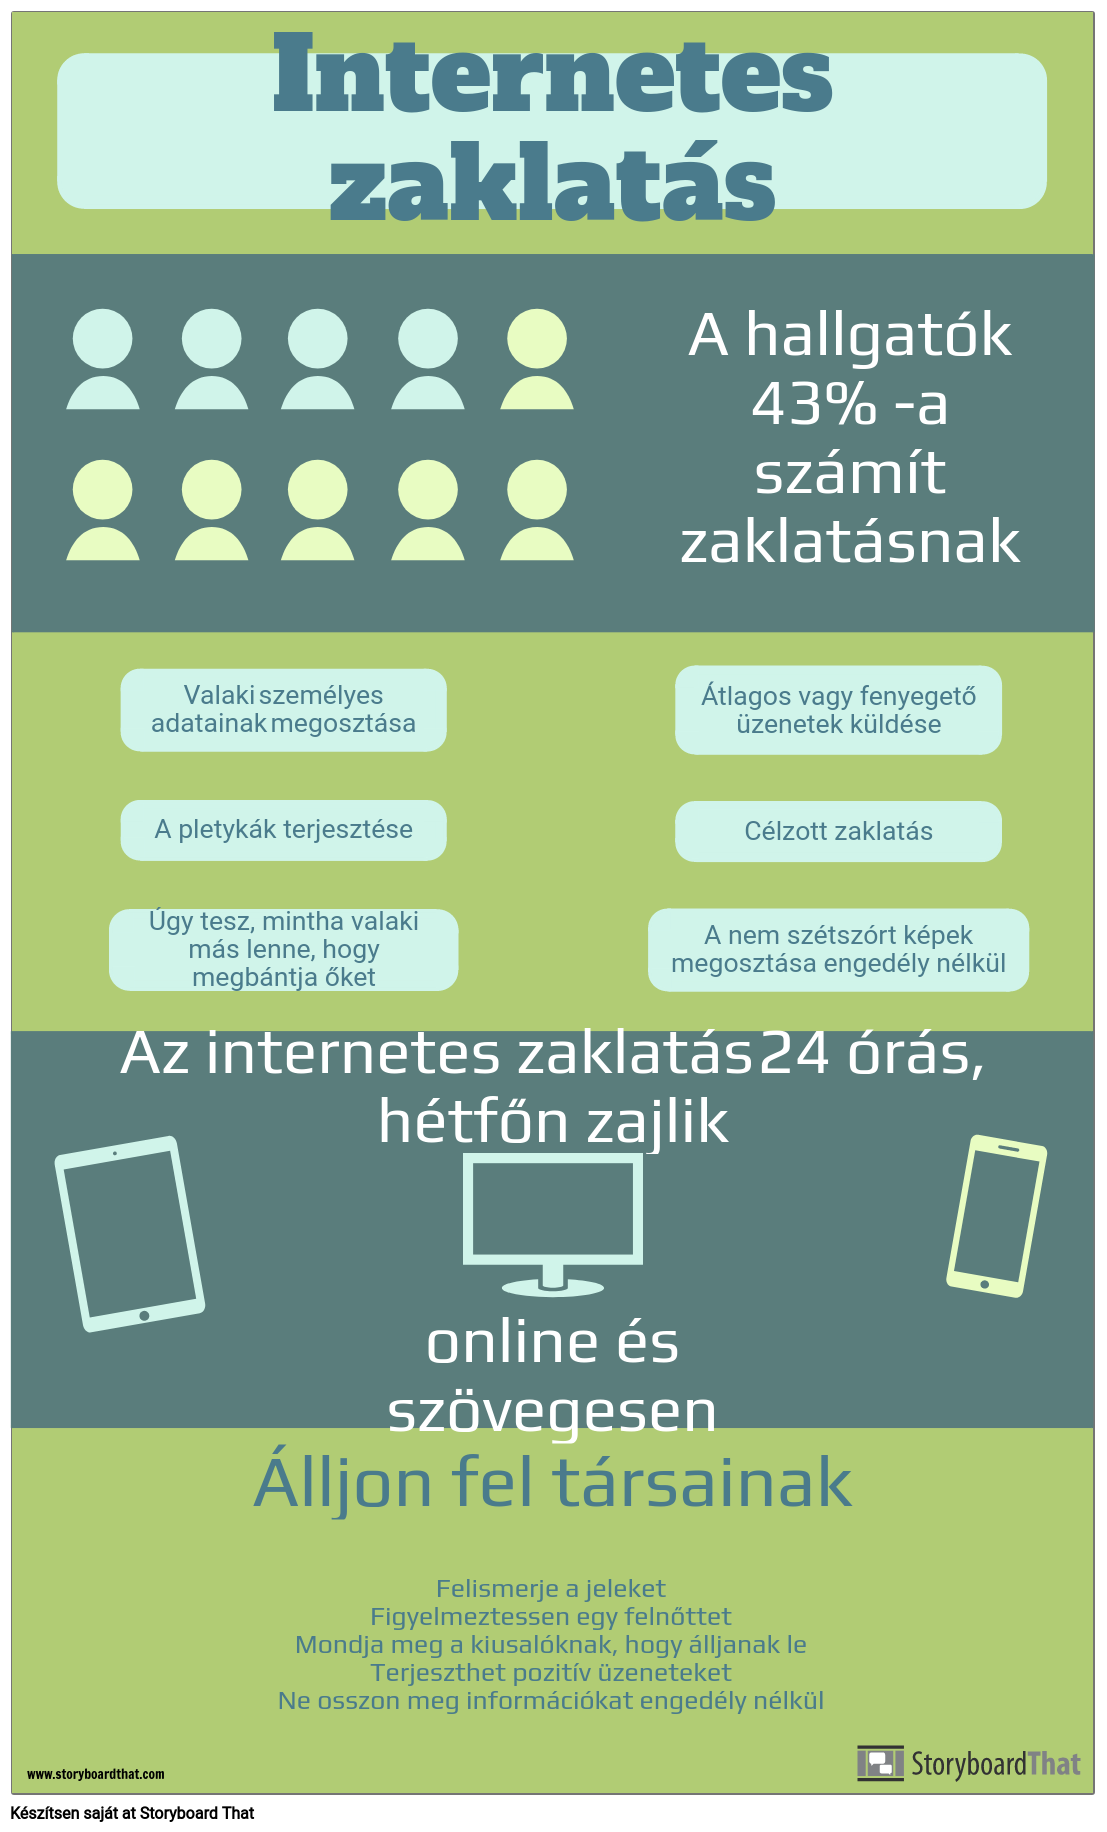 Cyberbullying Infographic